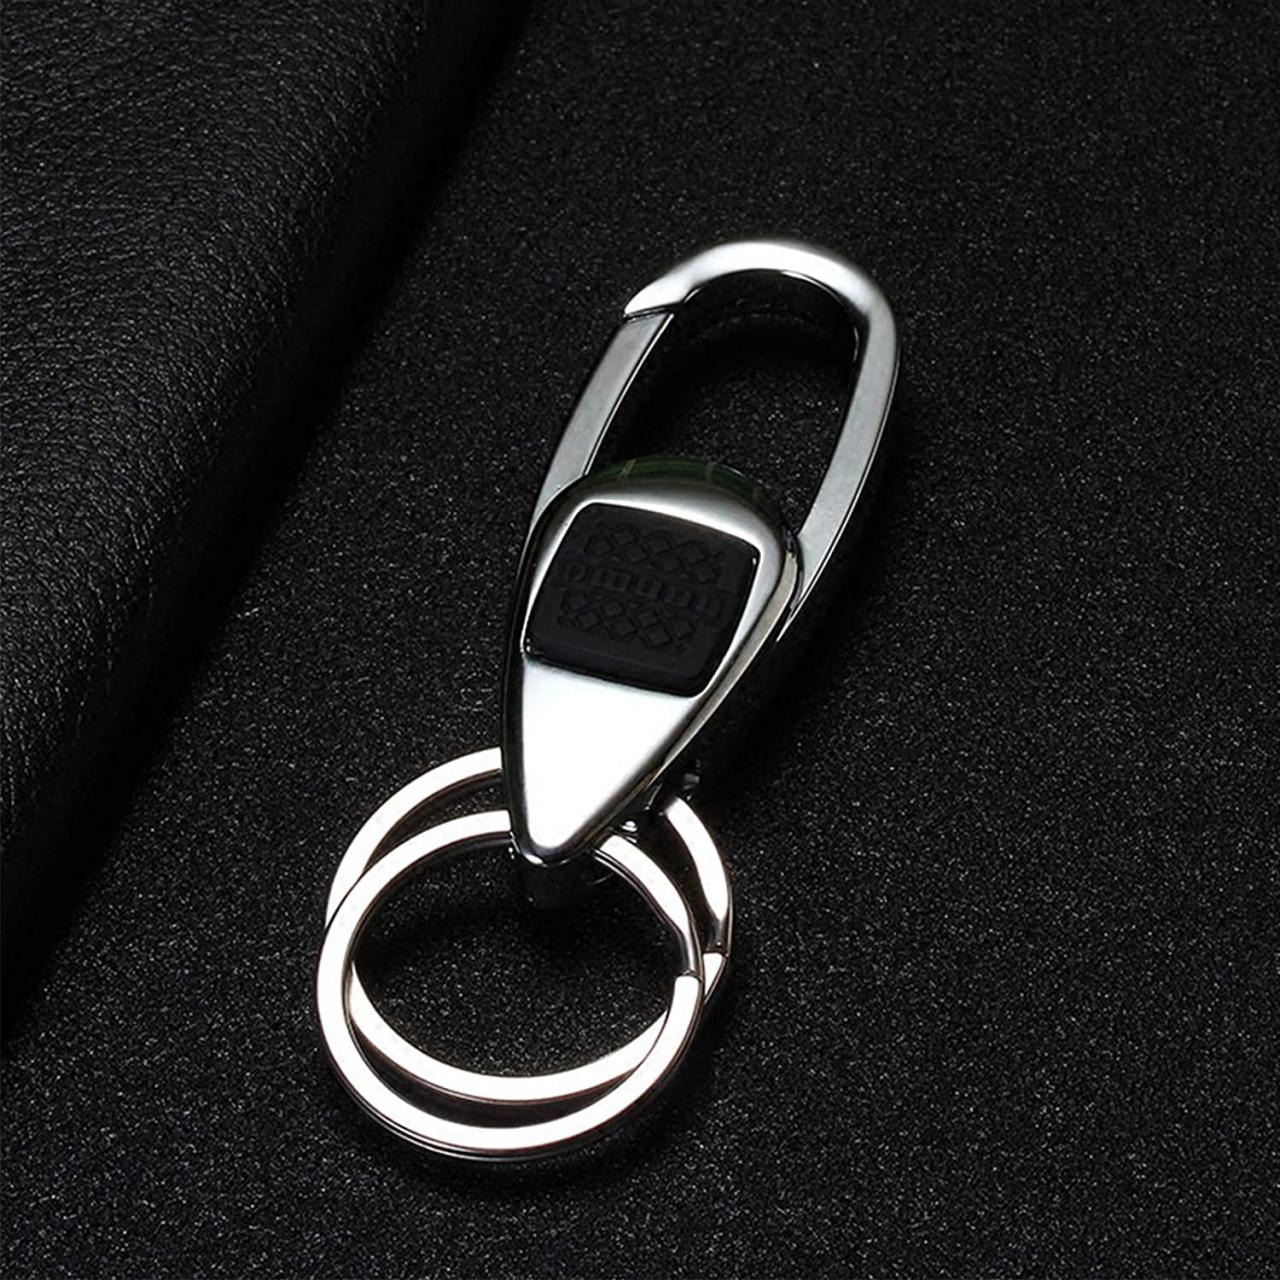 Buy Lancher Key chain with (2 Extra Key Rings and Gift Box) Big Key Clip  Durable Car Keychain for Men and Women Online in Hong Kong. B078TLY2JJ